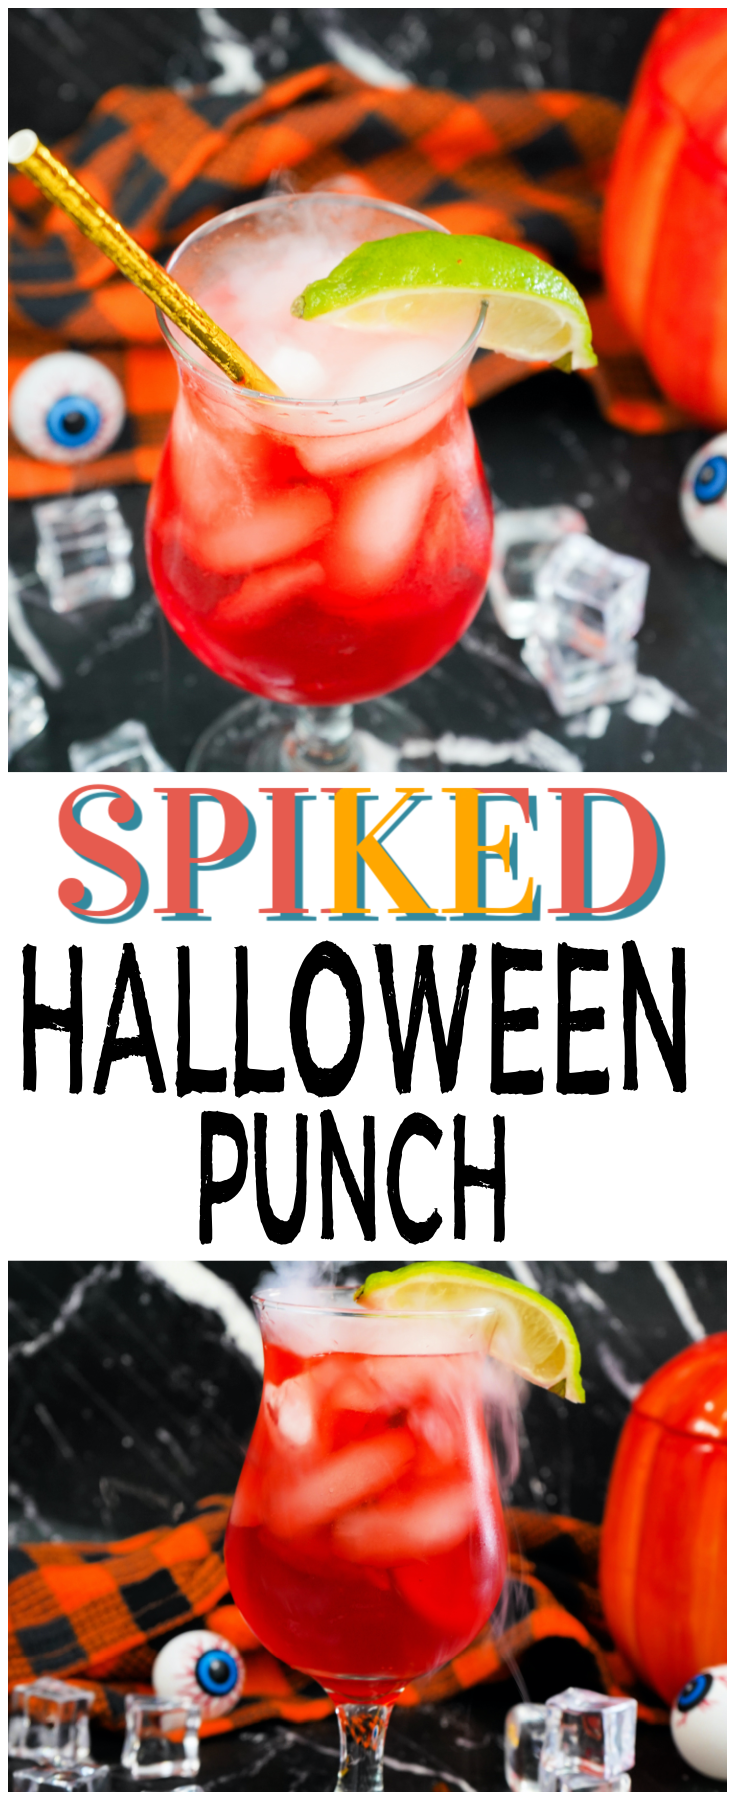 Spiked Halloween Punch (Adult Drink!)